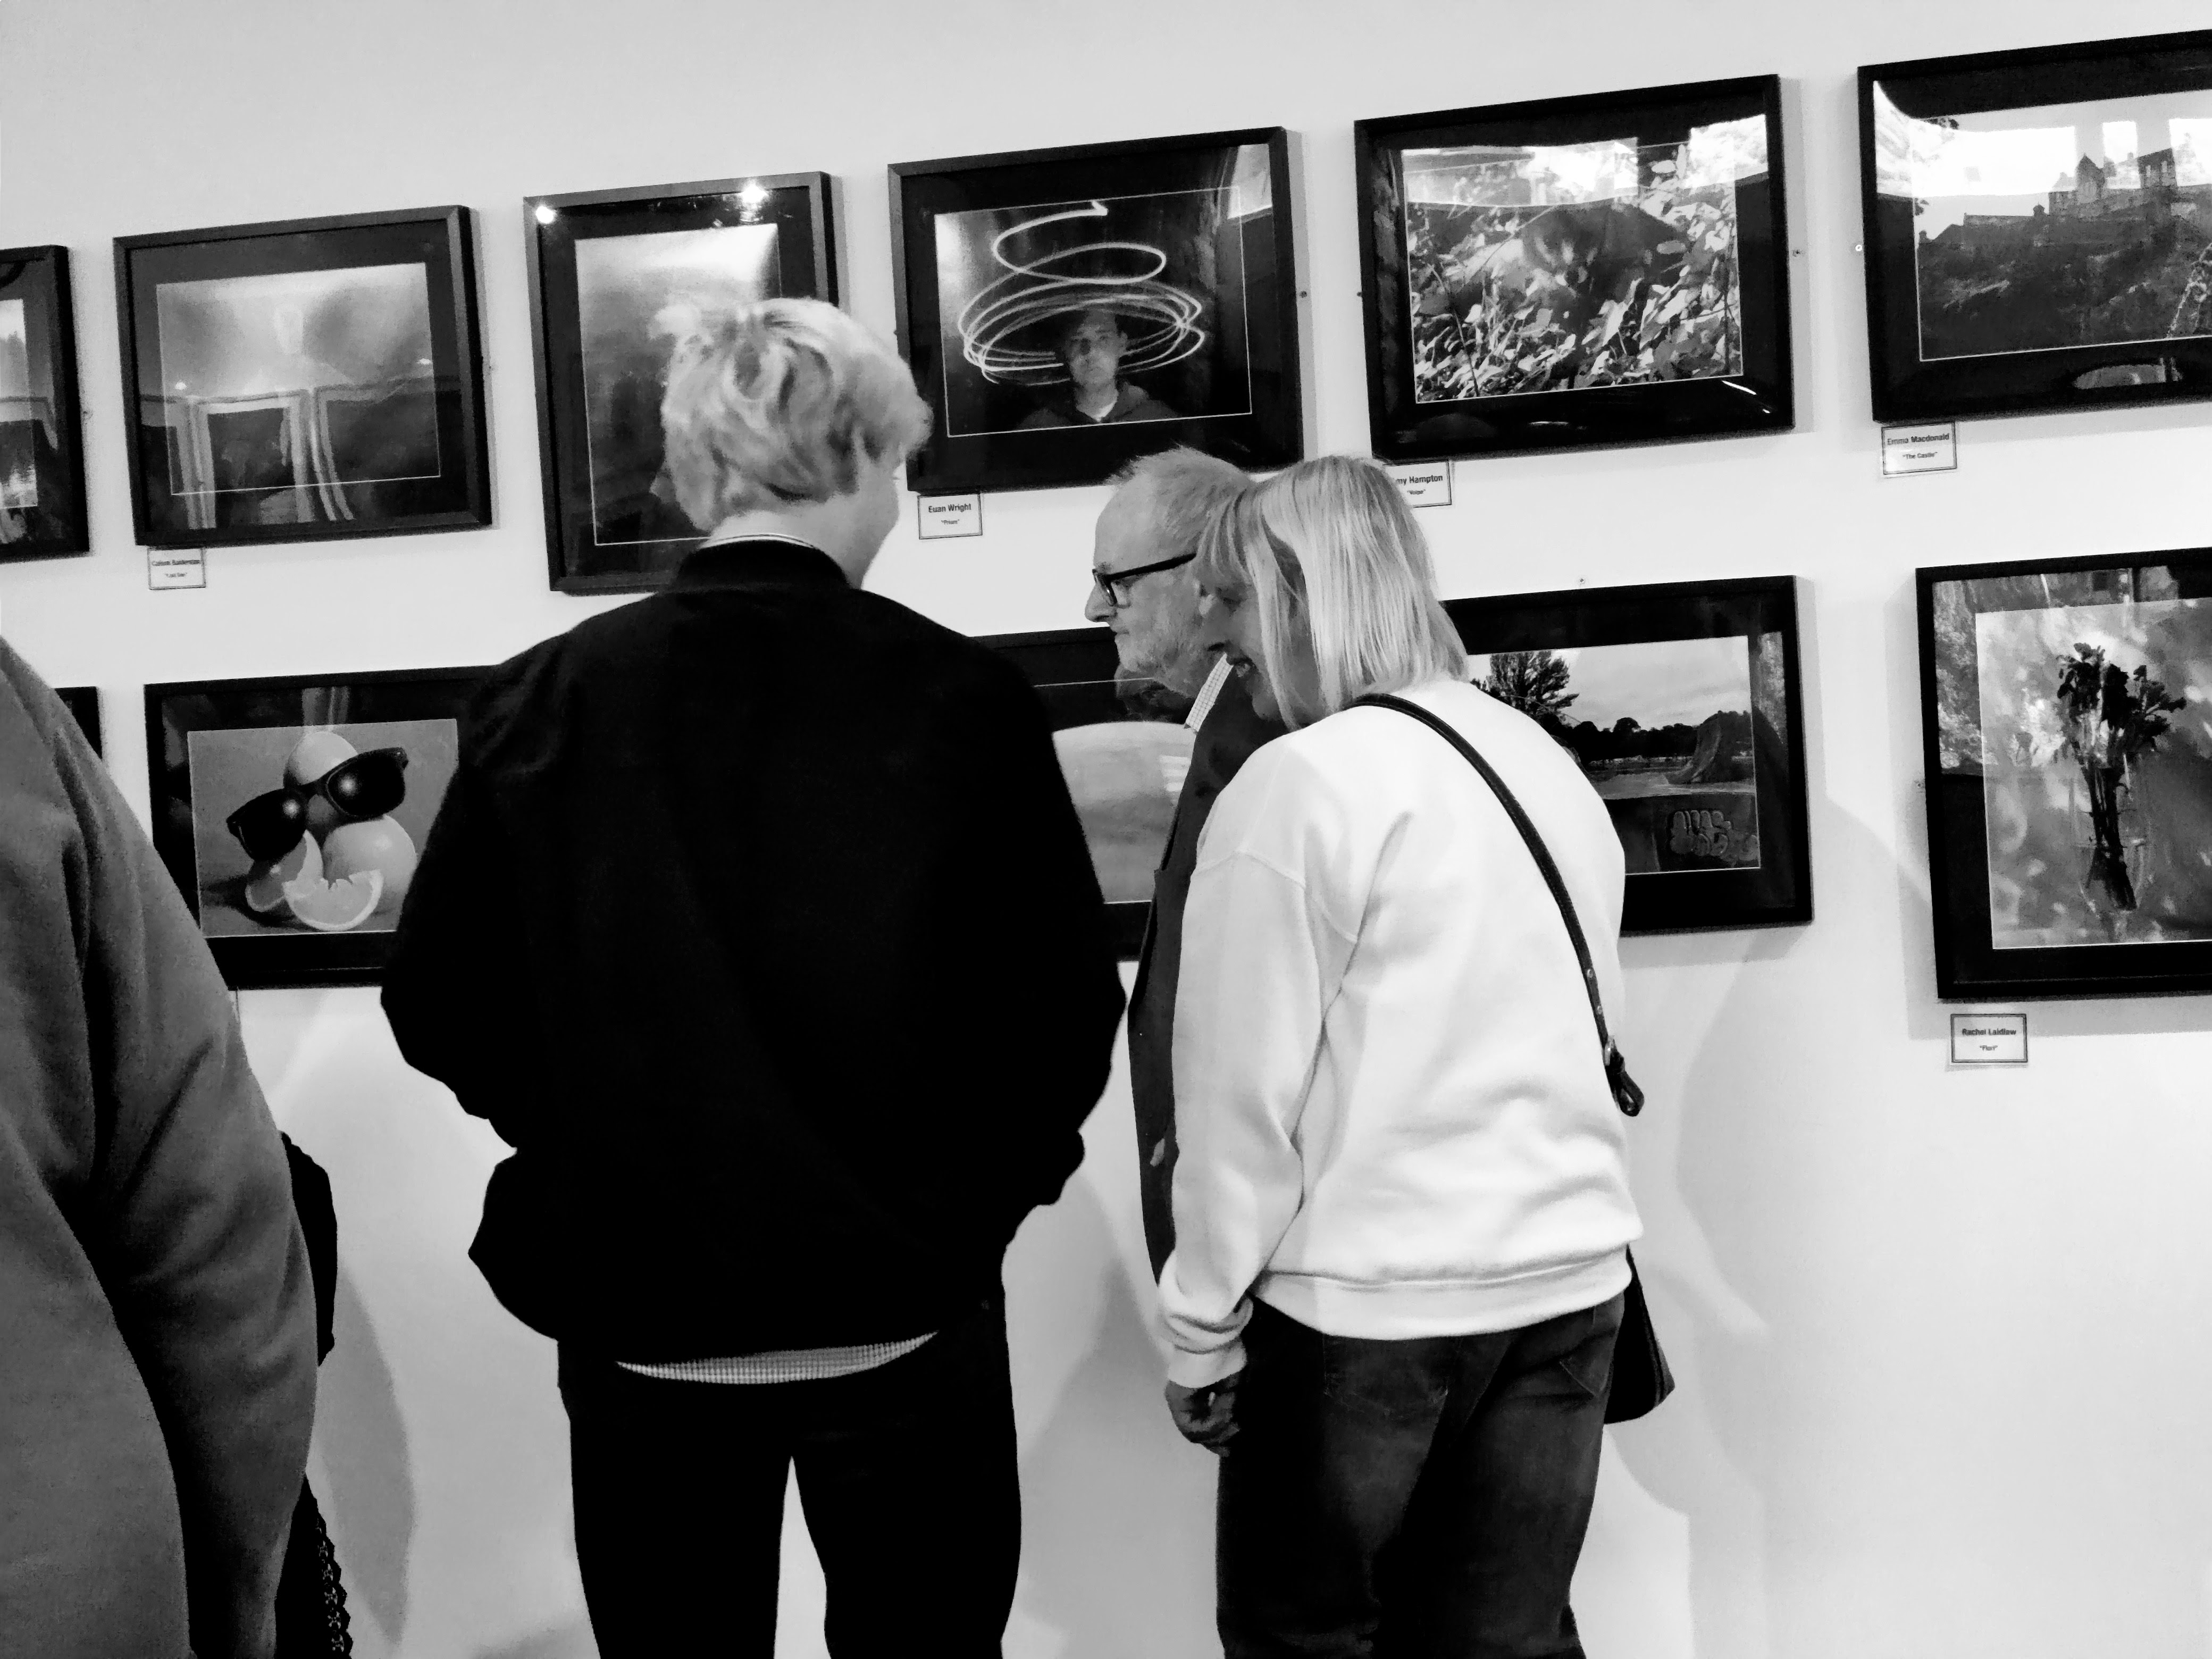 Gallery and Exhibitions @ Reconnect image